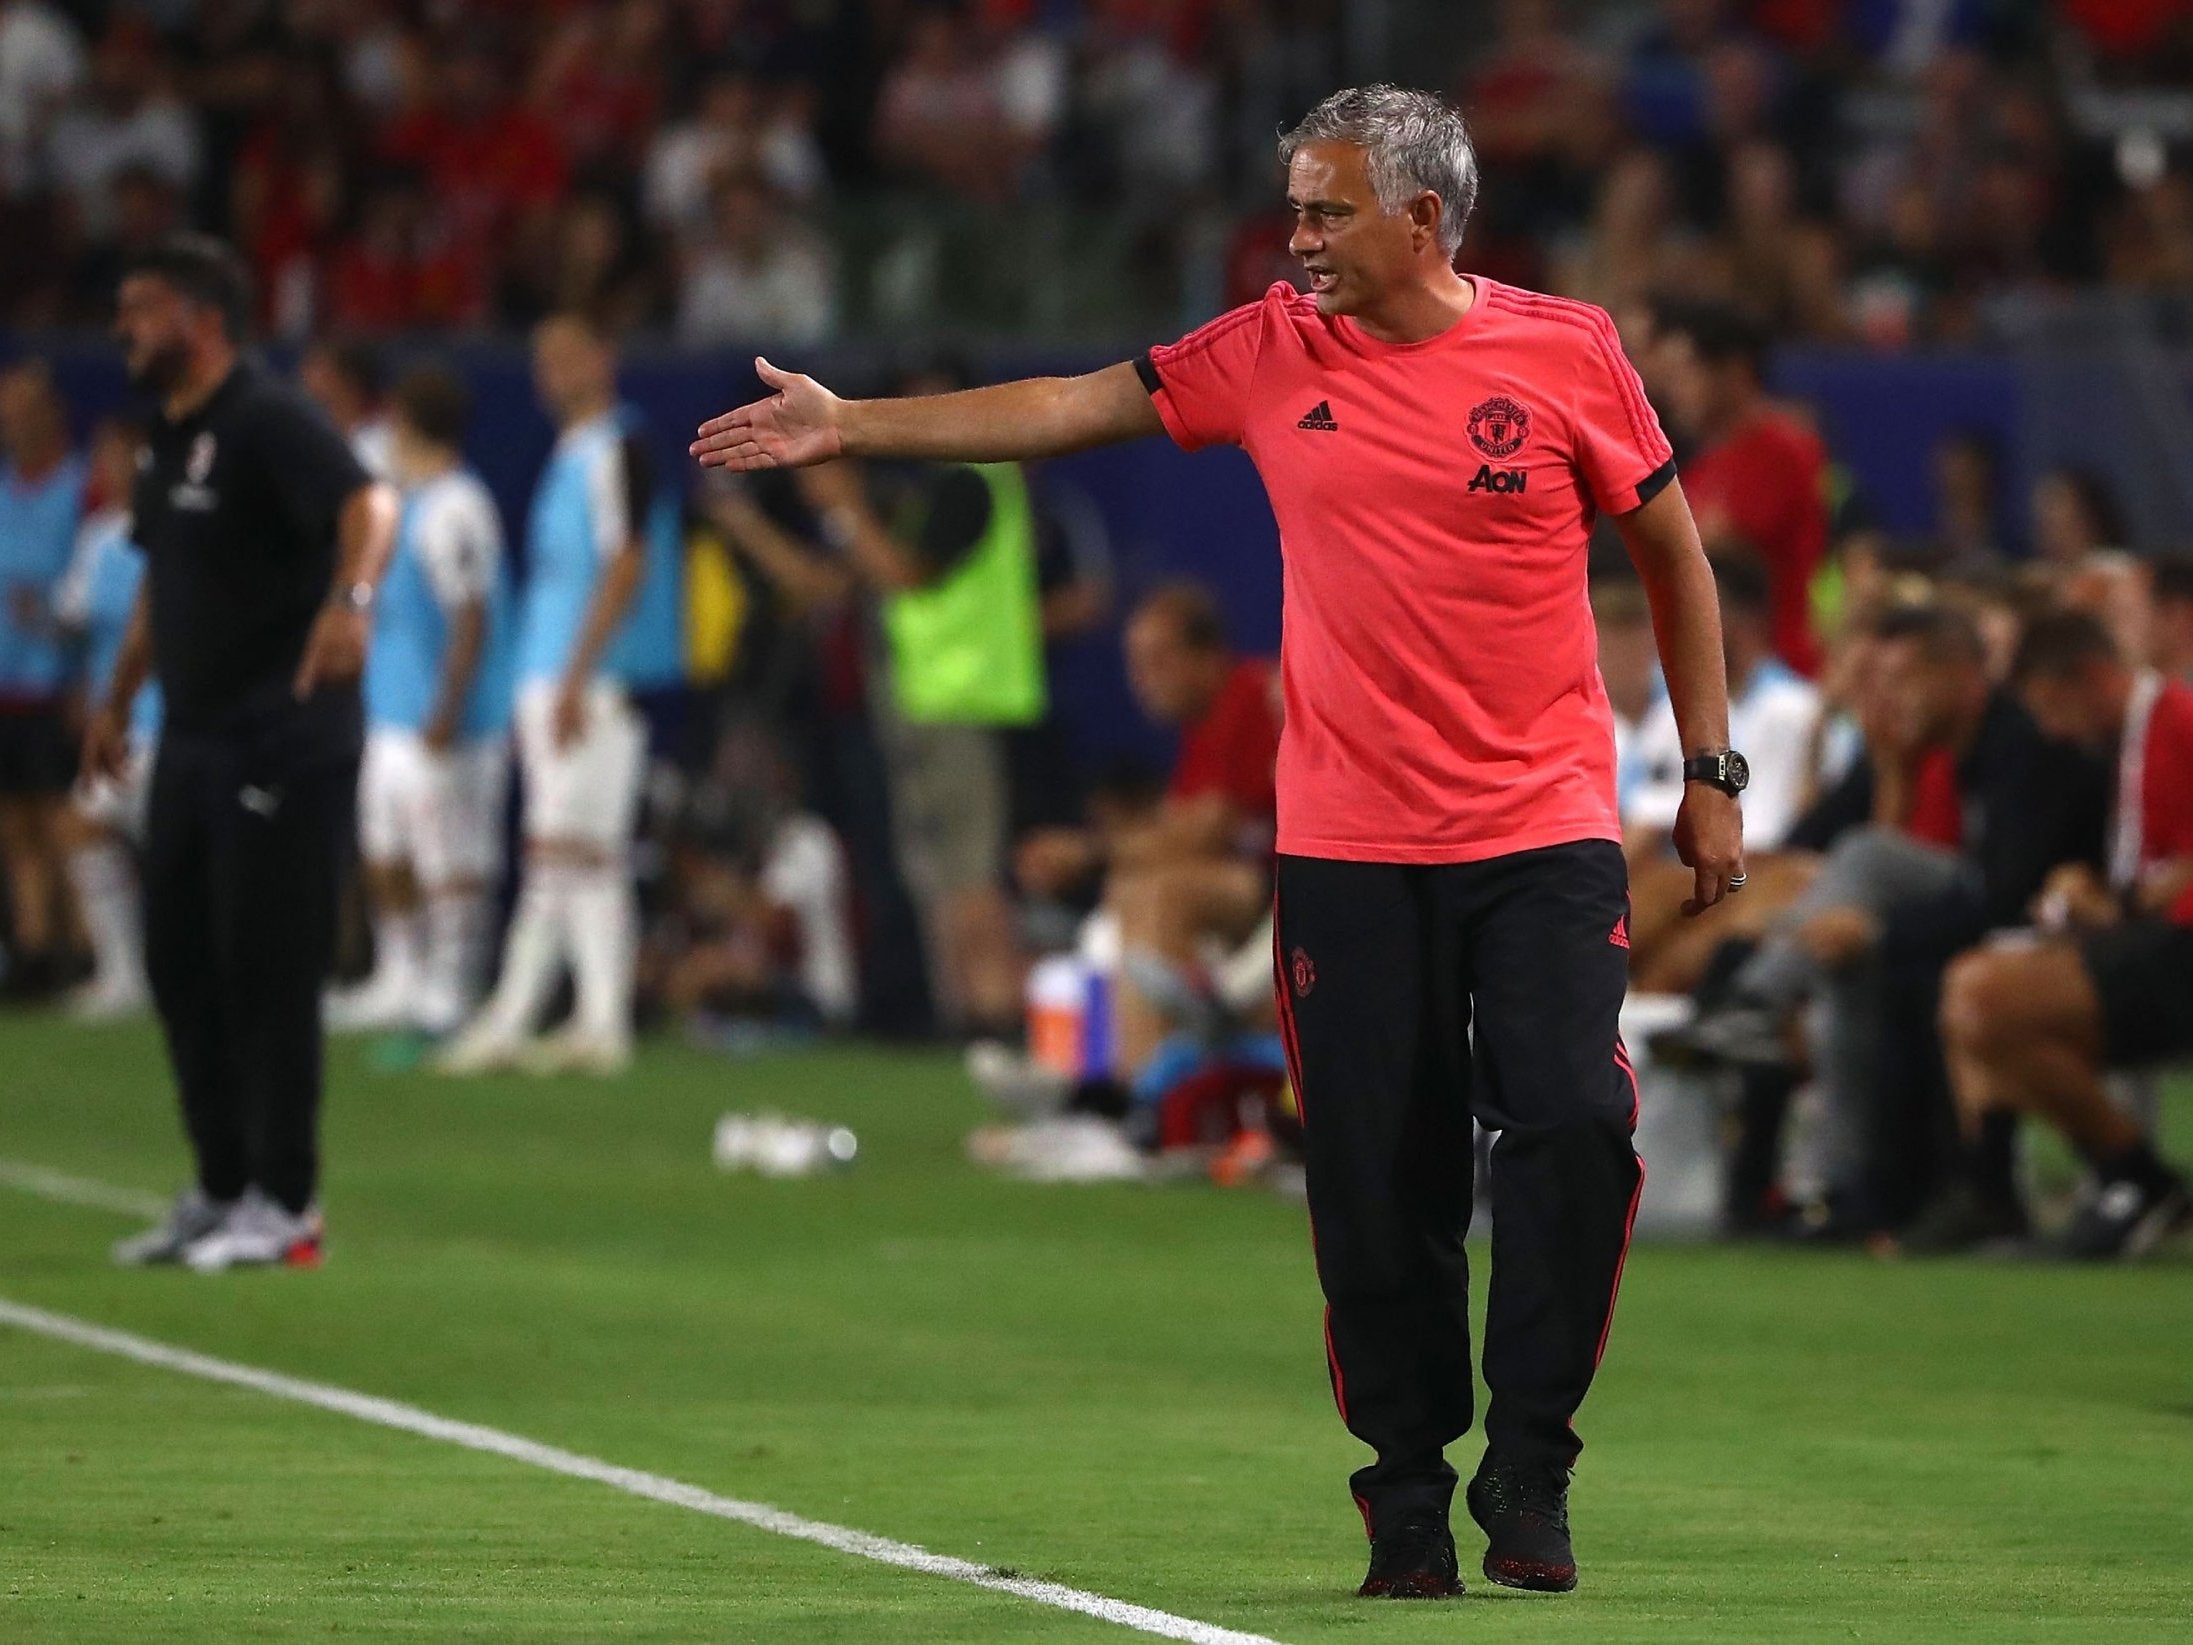 Mourinho admitted the pressure was on Liverpool